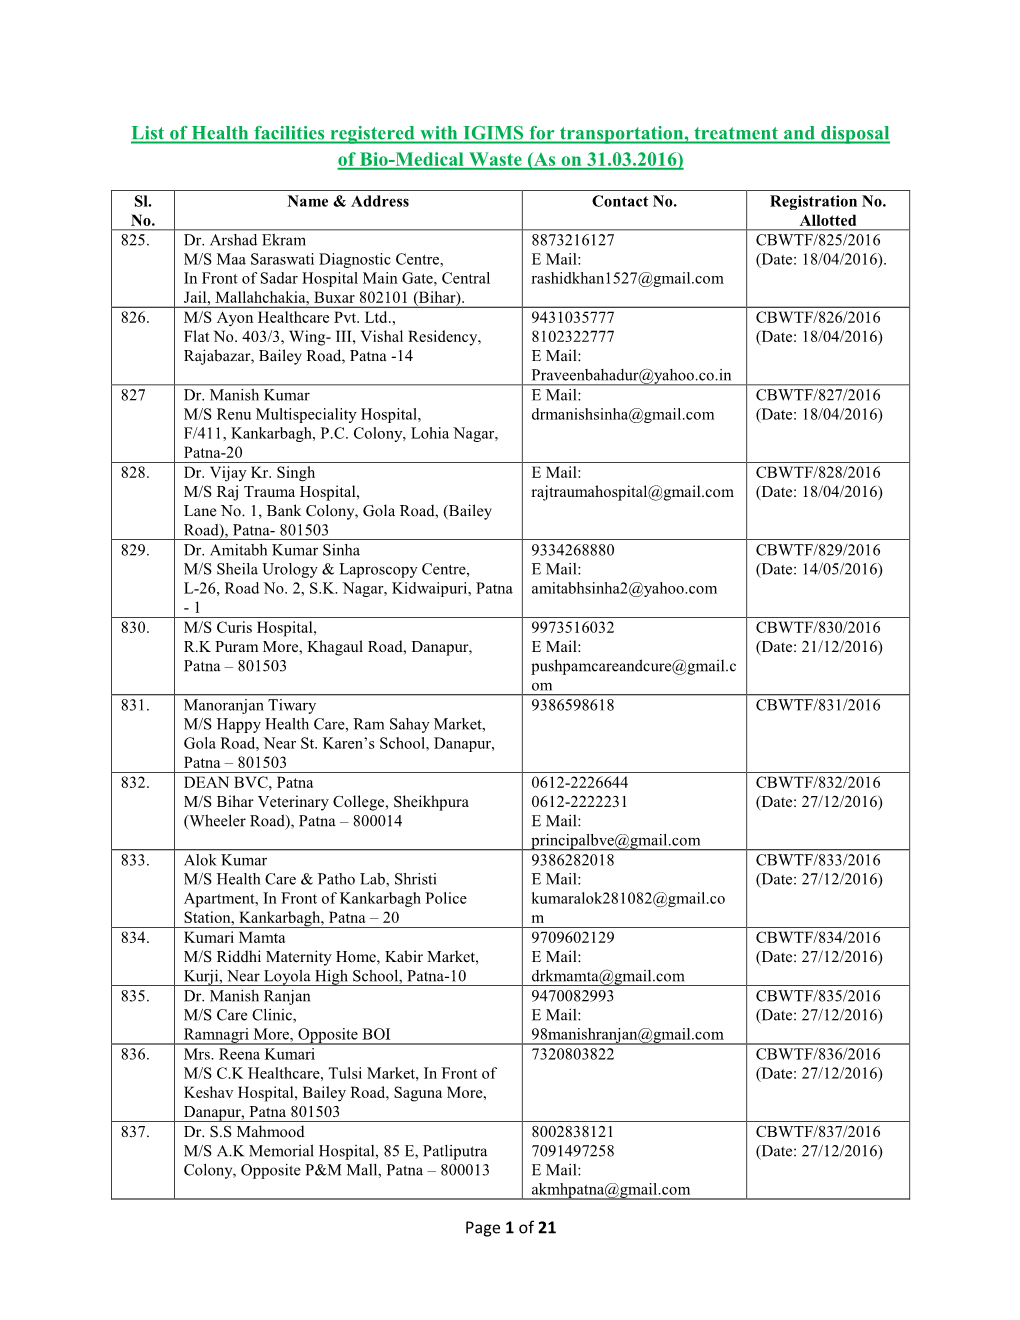 List of Health Facilities Registered with IGIMS for Transportation, Treatment and Disposal of Bio-Medical Waste (As on 31.03.2016)